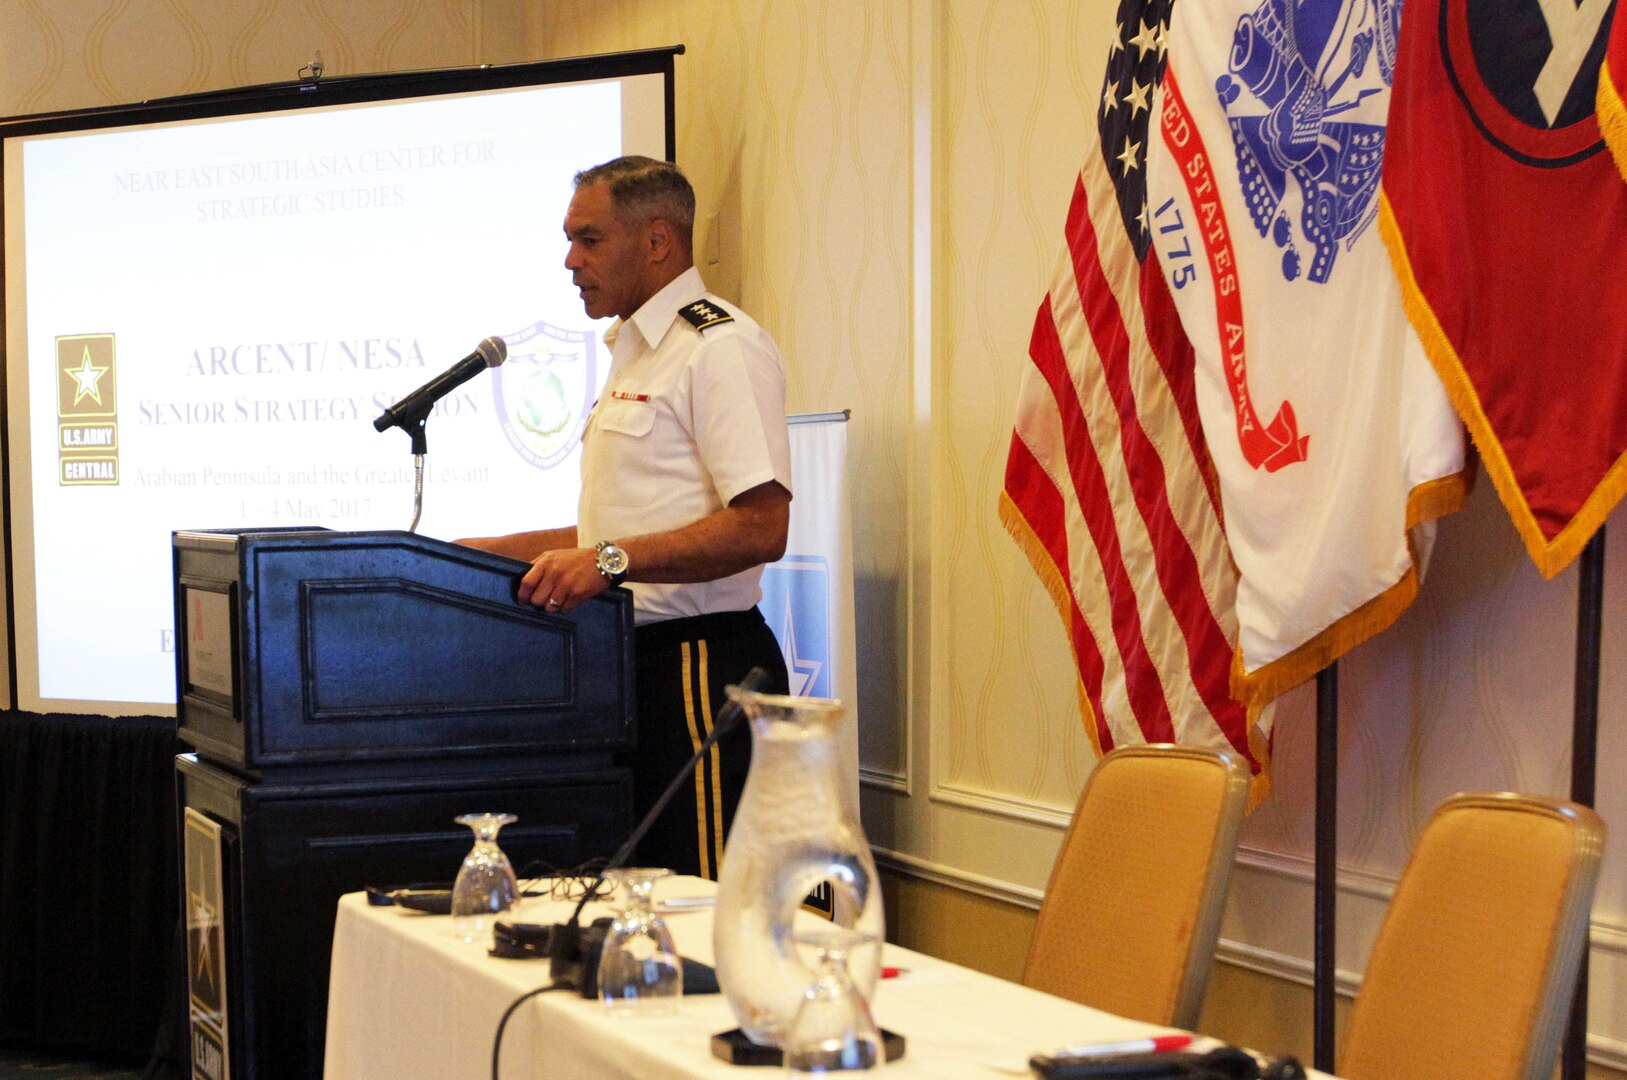 Lt. Gen. Michael Garrett, commanding general, U.S. Army Central, gives the opening remarks to the 2017 Senior Strategy Session in Tyson’s Corner, Va., May 2, 2017. In his remarks, Garrett spoke on the importance of drawing from the lessons learned at the symposium to help USARCENT and its partner nations find solutions to their mutual security concerns.